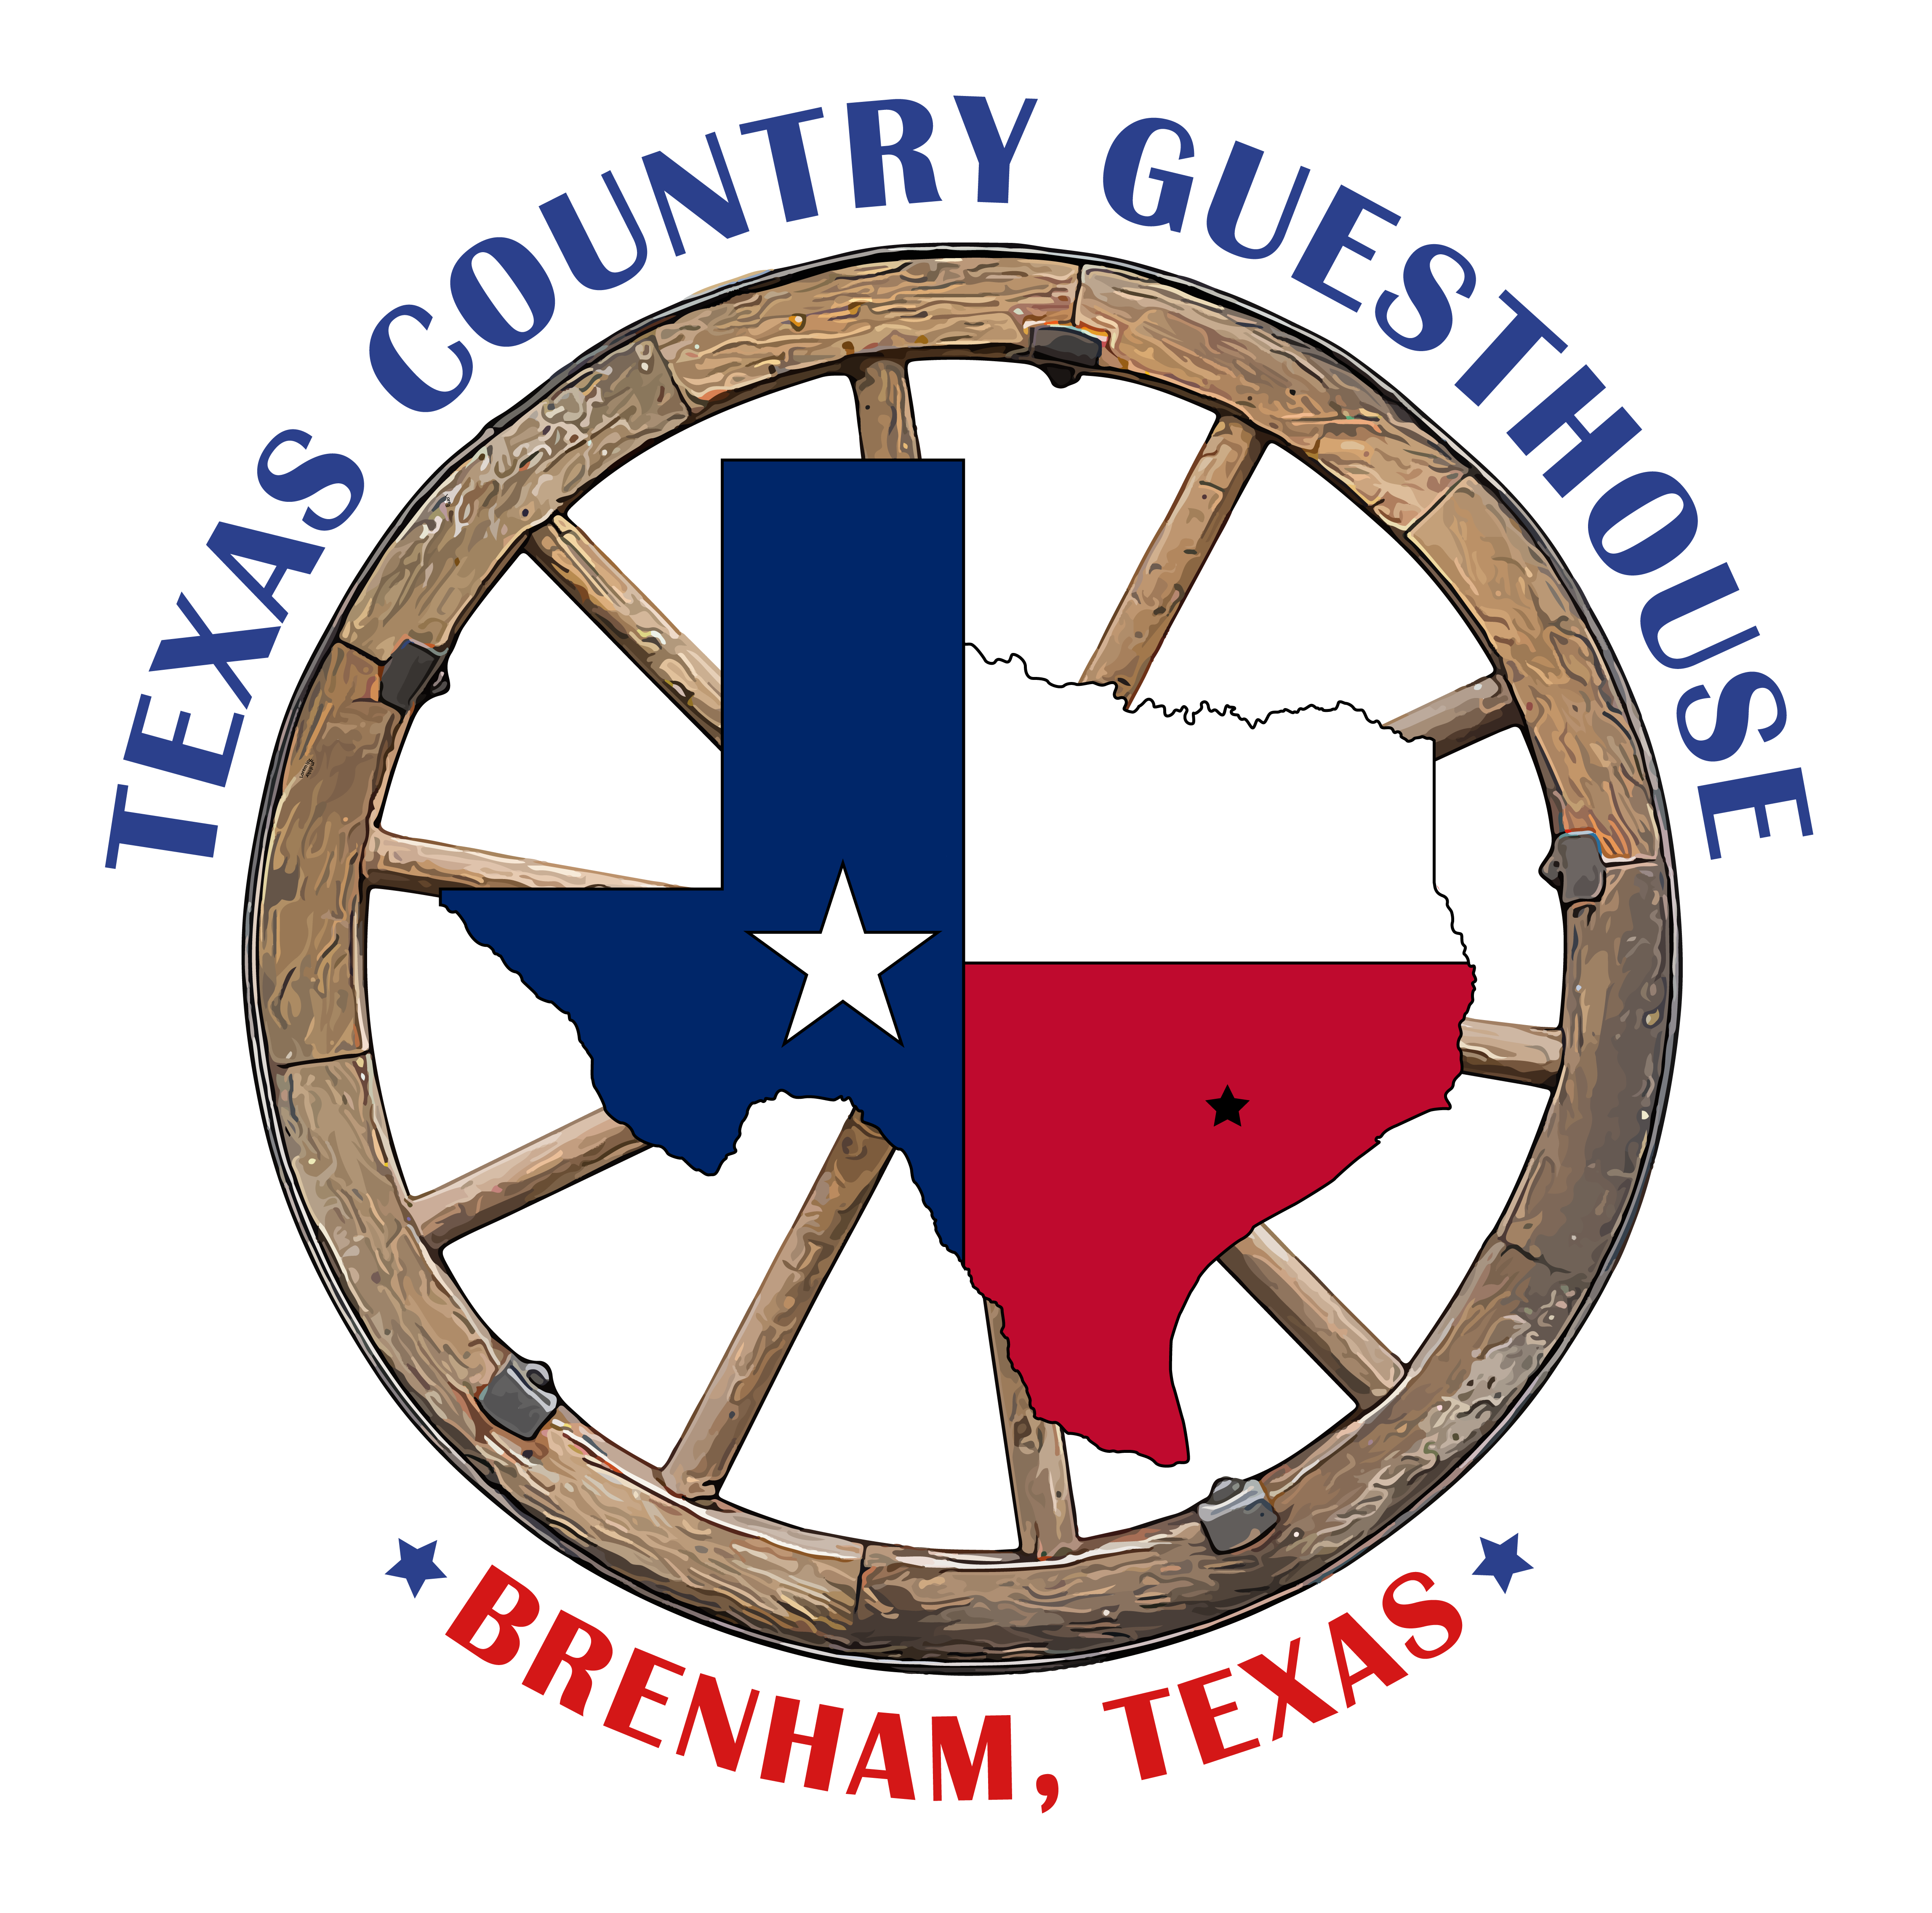 Texas Country Guesthouse